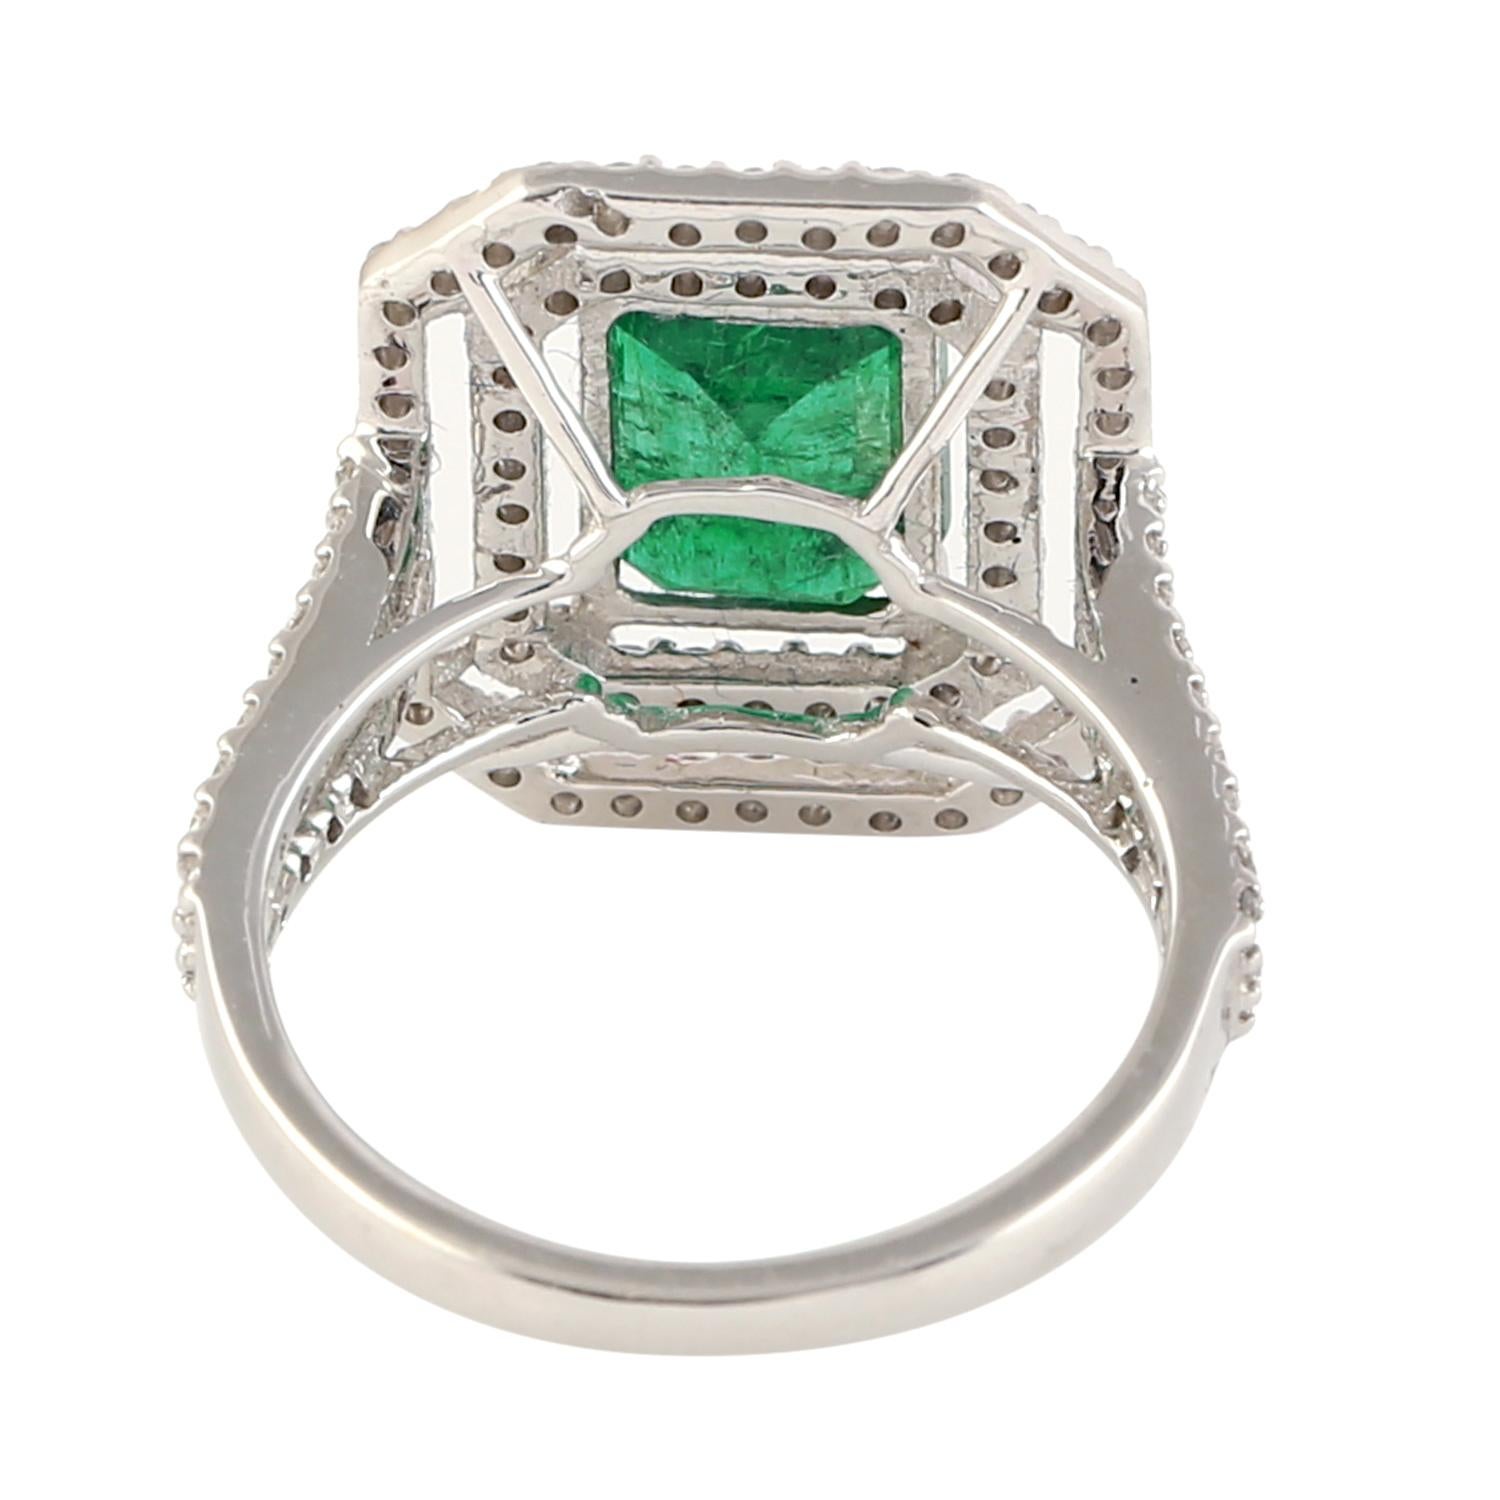 Octogen Cut Zambian Emerald Ring with Diamonds Made in 14k White Gold In New Condition For Sale In New York, NY